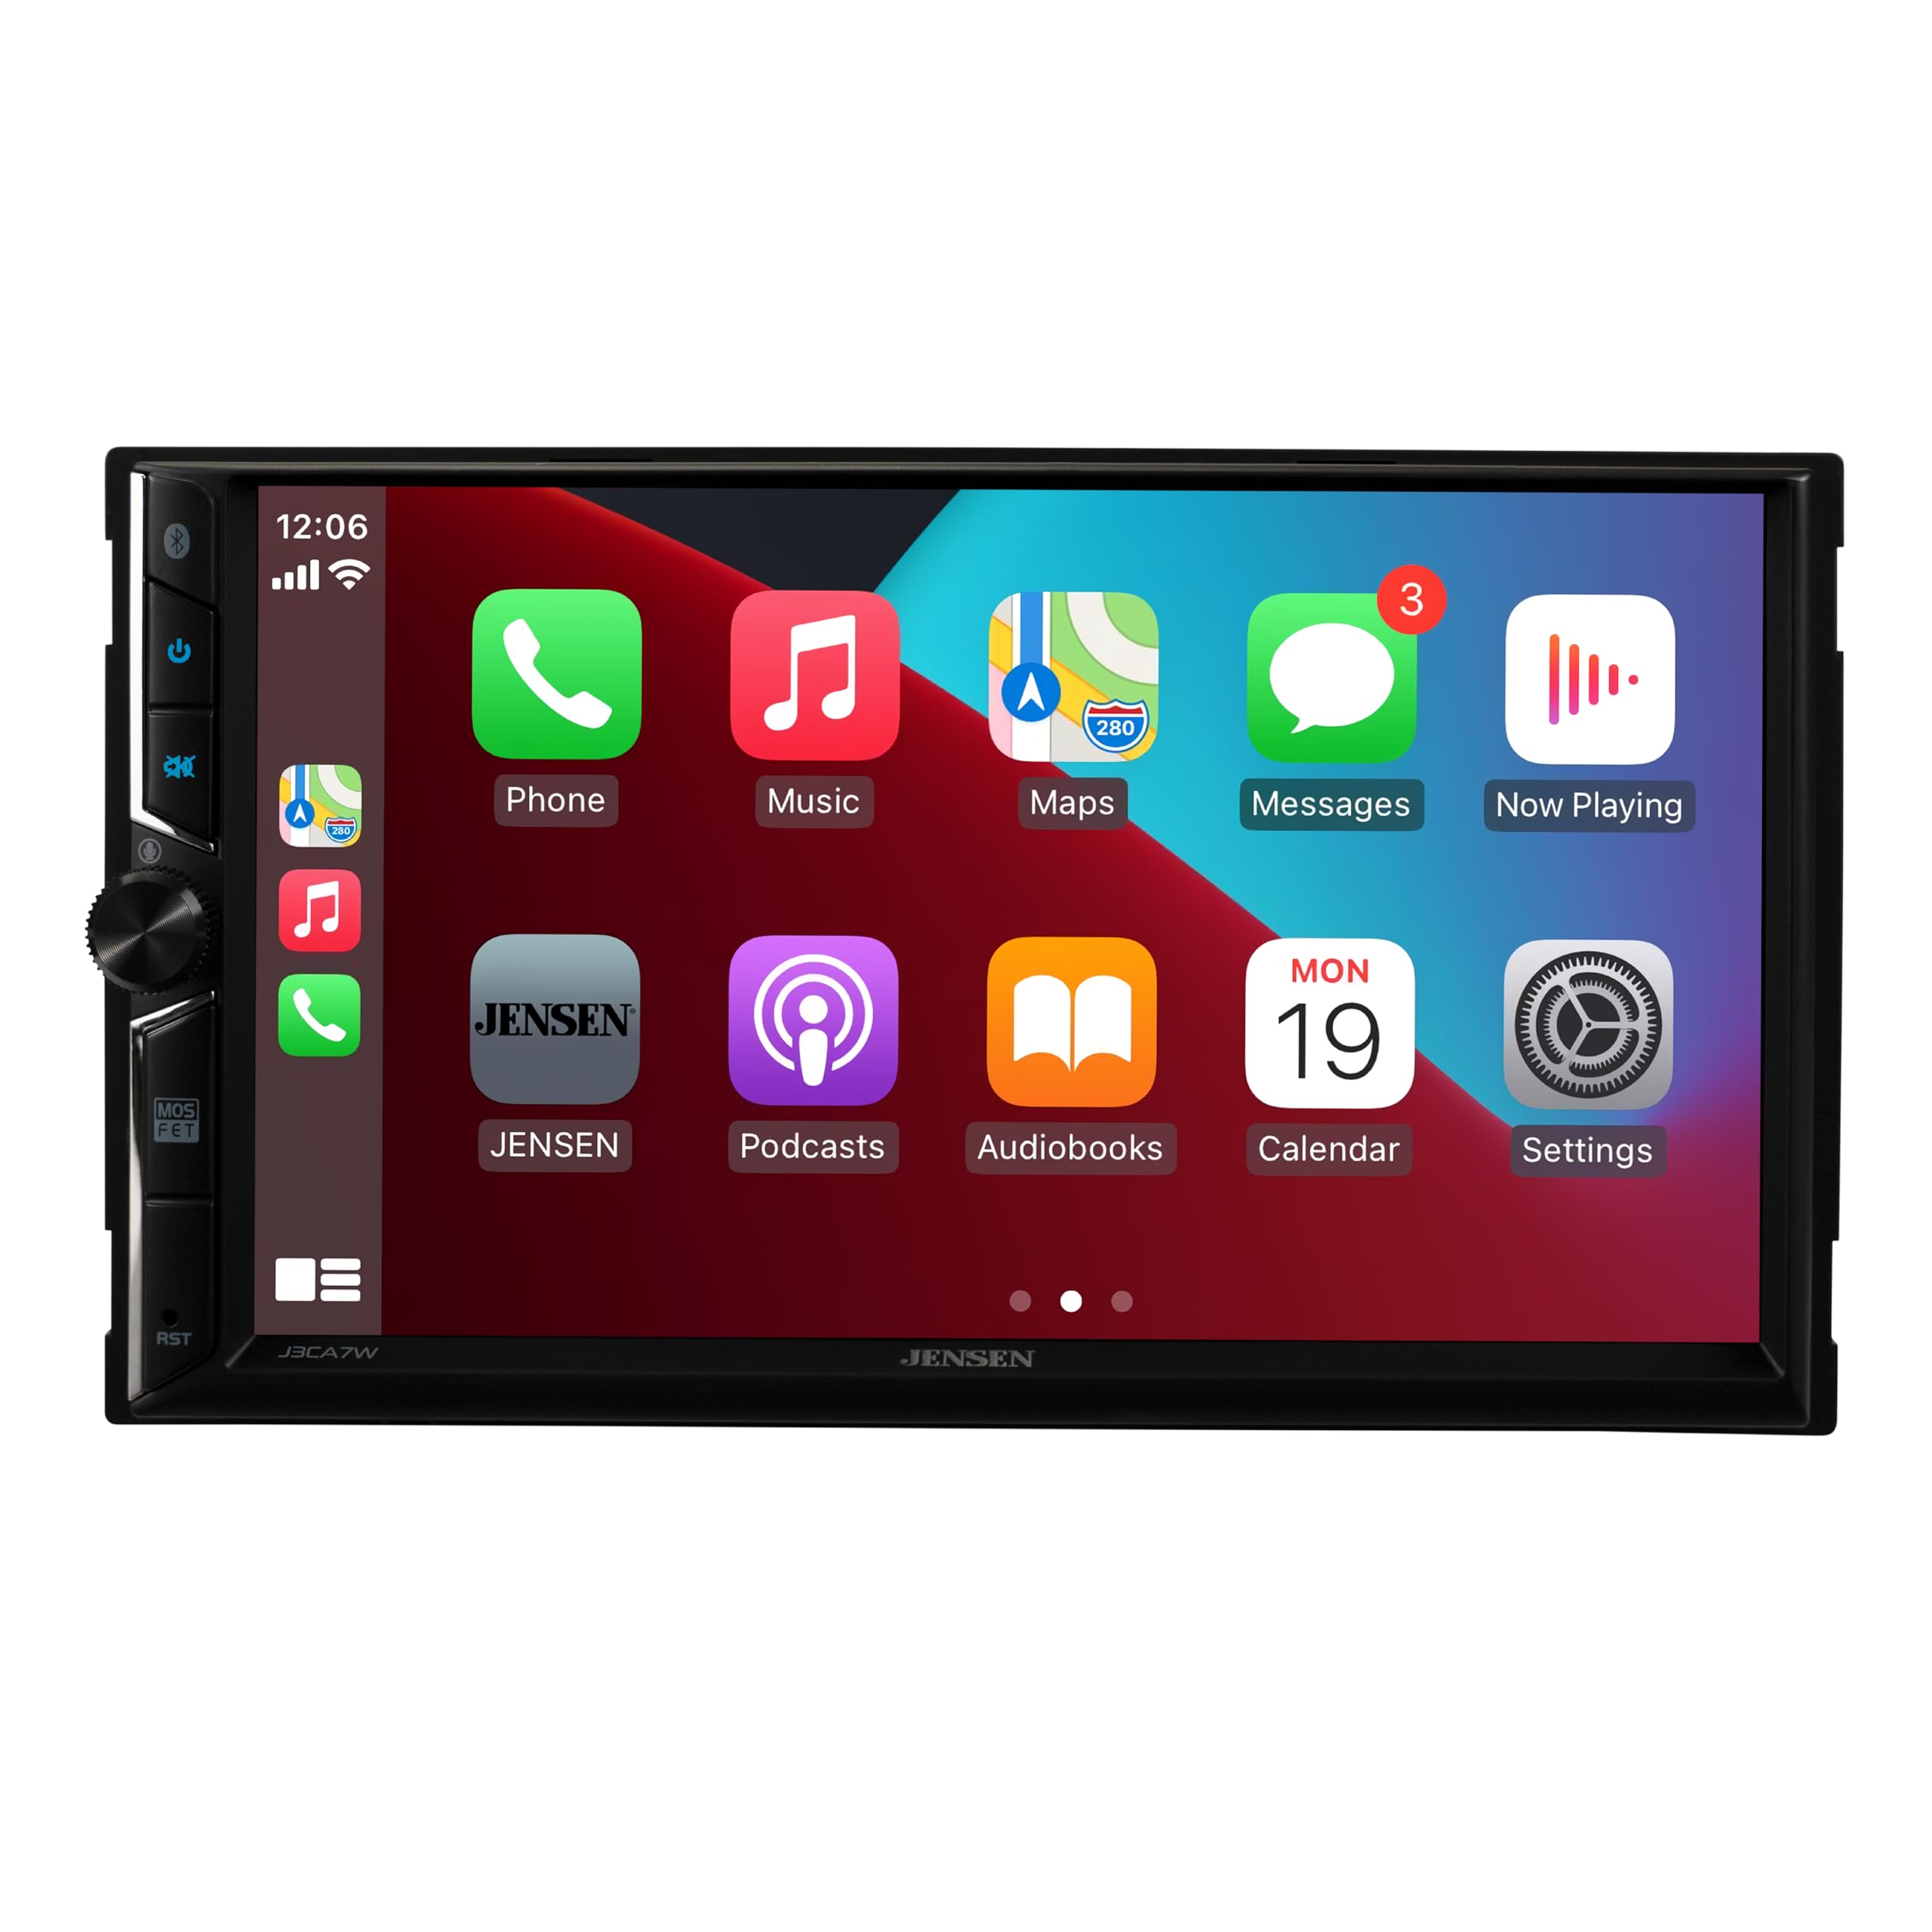 Jensen J3CA7W 7-inch Certified Apple CarPlay Android Auto Wired or Wireless | Double DIN Touchscreen Car Stereo Radio | Bluetooth | Backup Camera Input | USB Playback & Charge